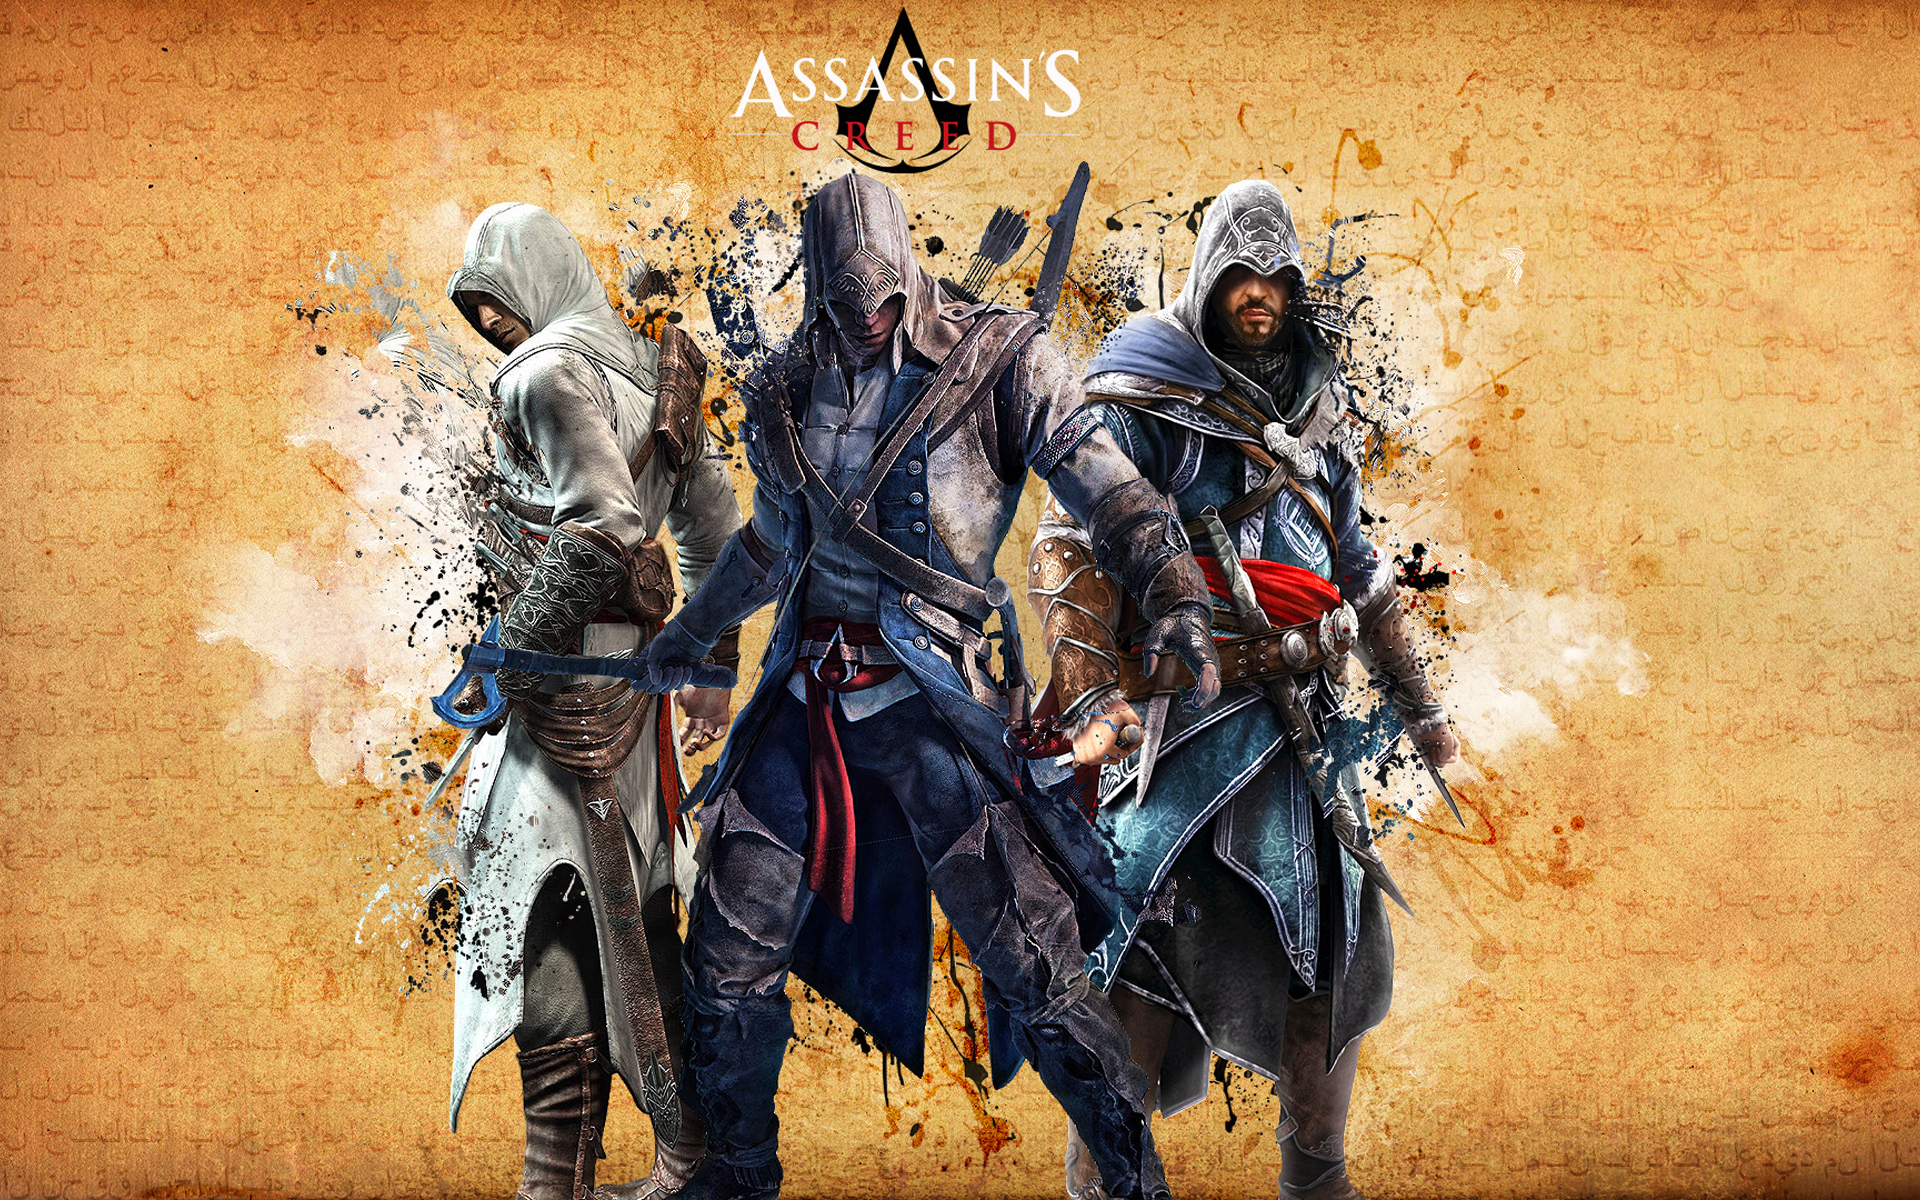 assassin's creed, connor (assassin's creed), video game, altair (assassin's creed), ezio (assassin's creed)